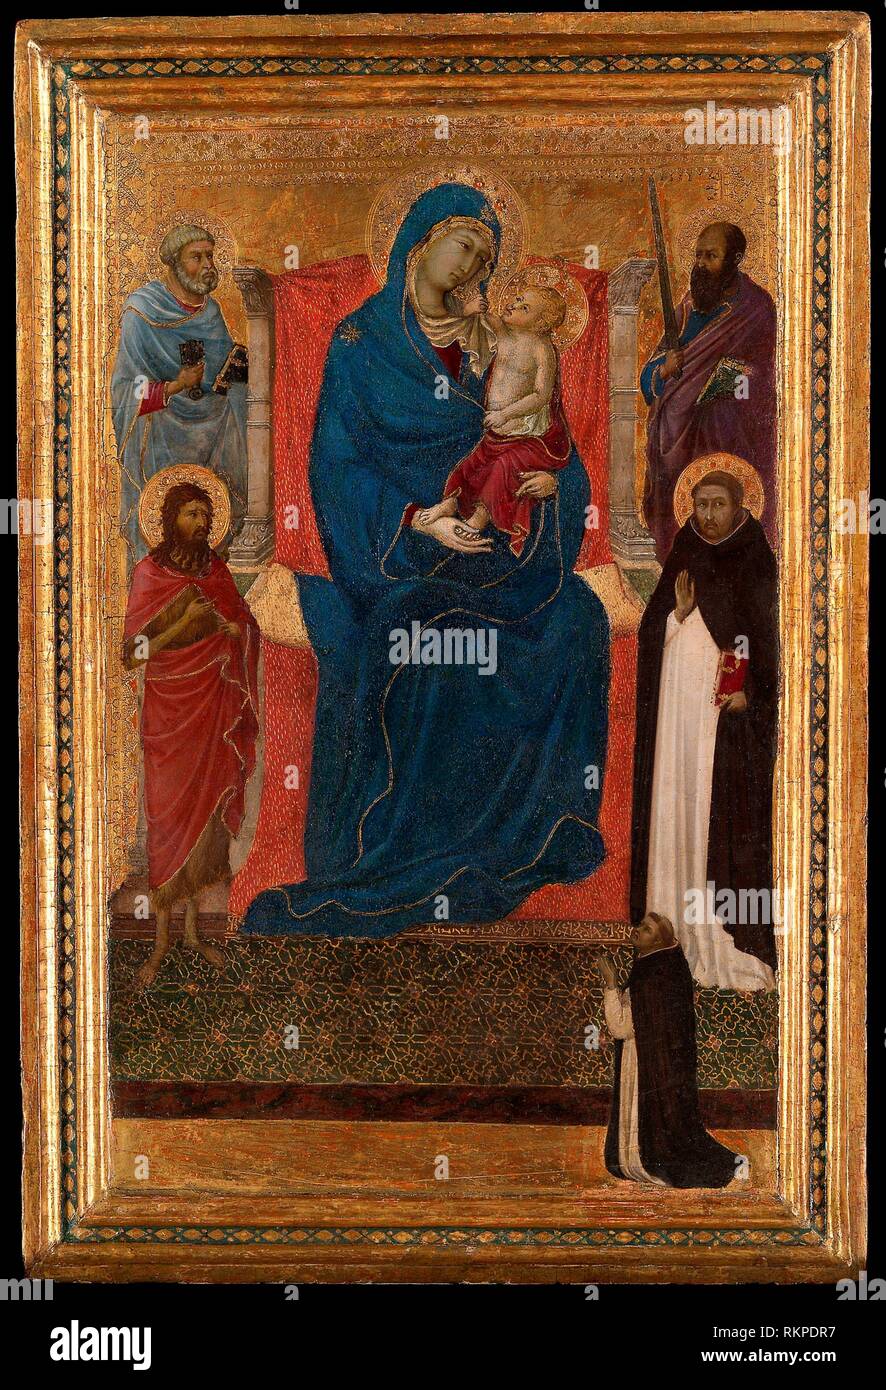 Virgin and Child Enthroned with Saints Peter, Paul, John the Baptist, and Dominic and a Dominican Supplicant - 1325/35 - Attributed to Ugolino di Stock Photo